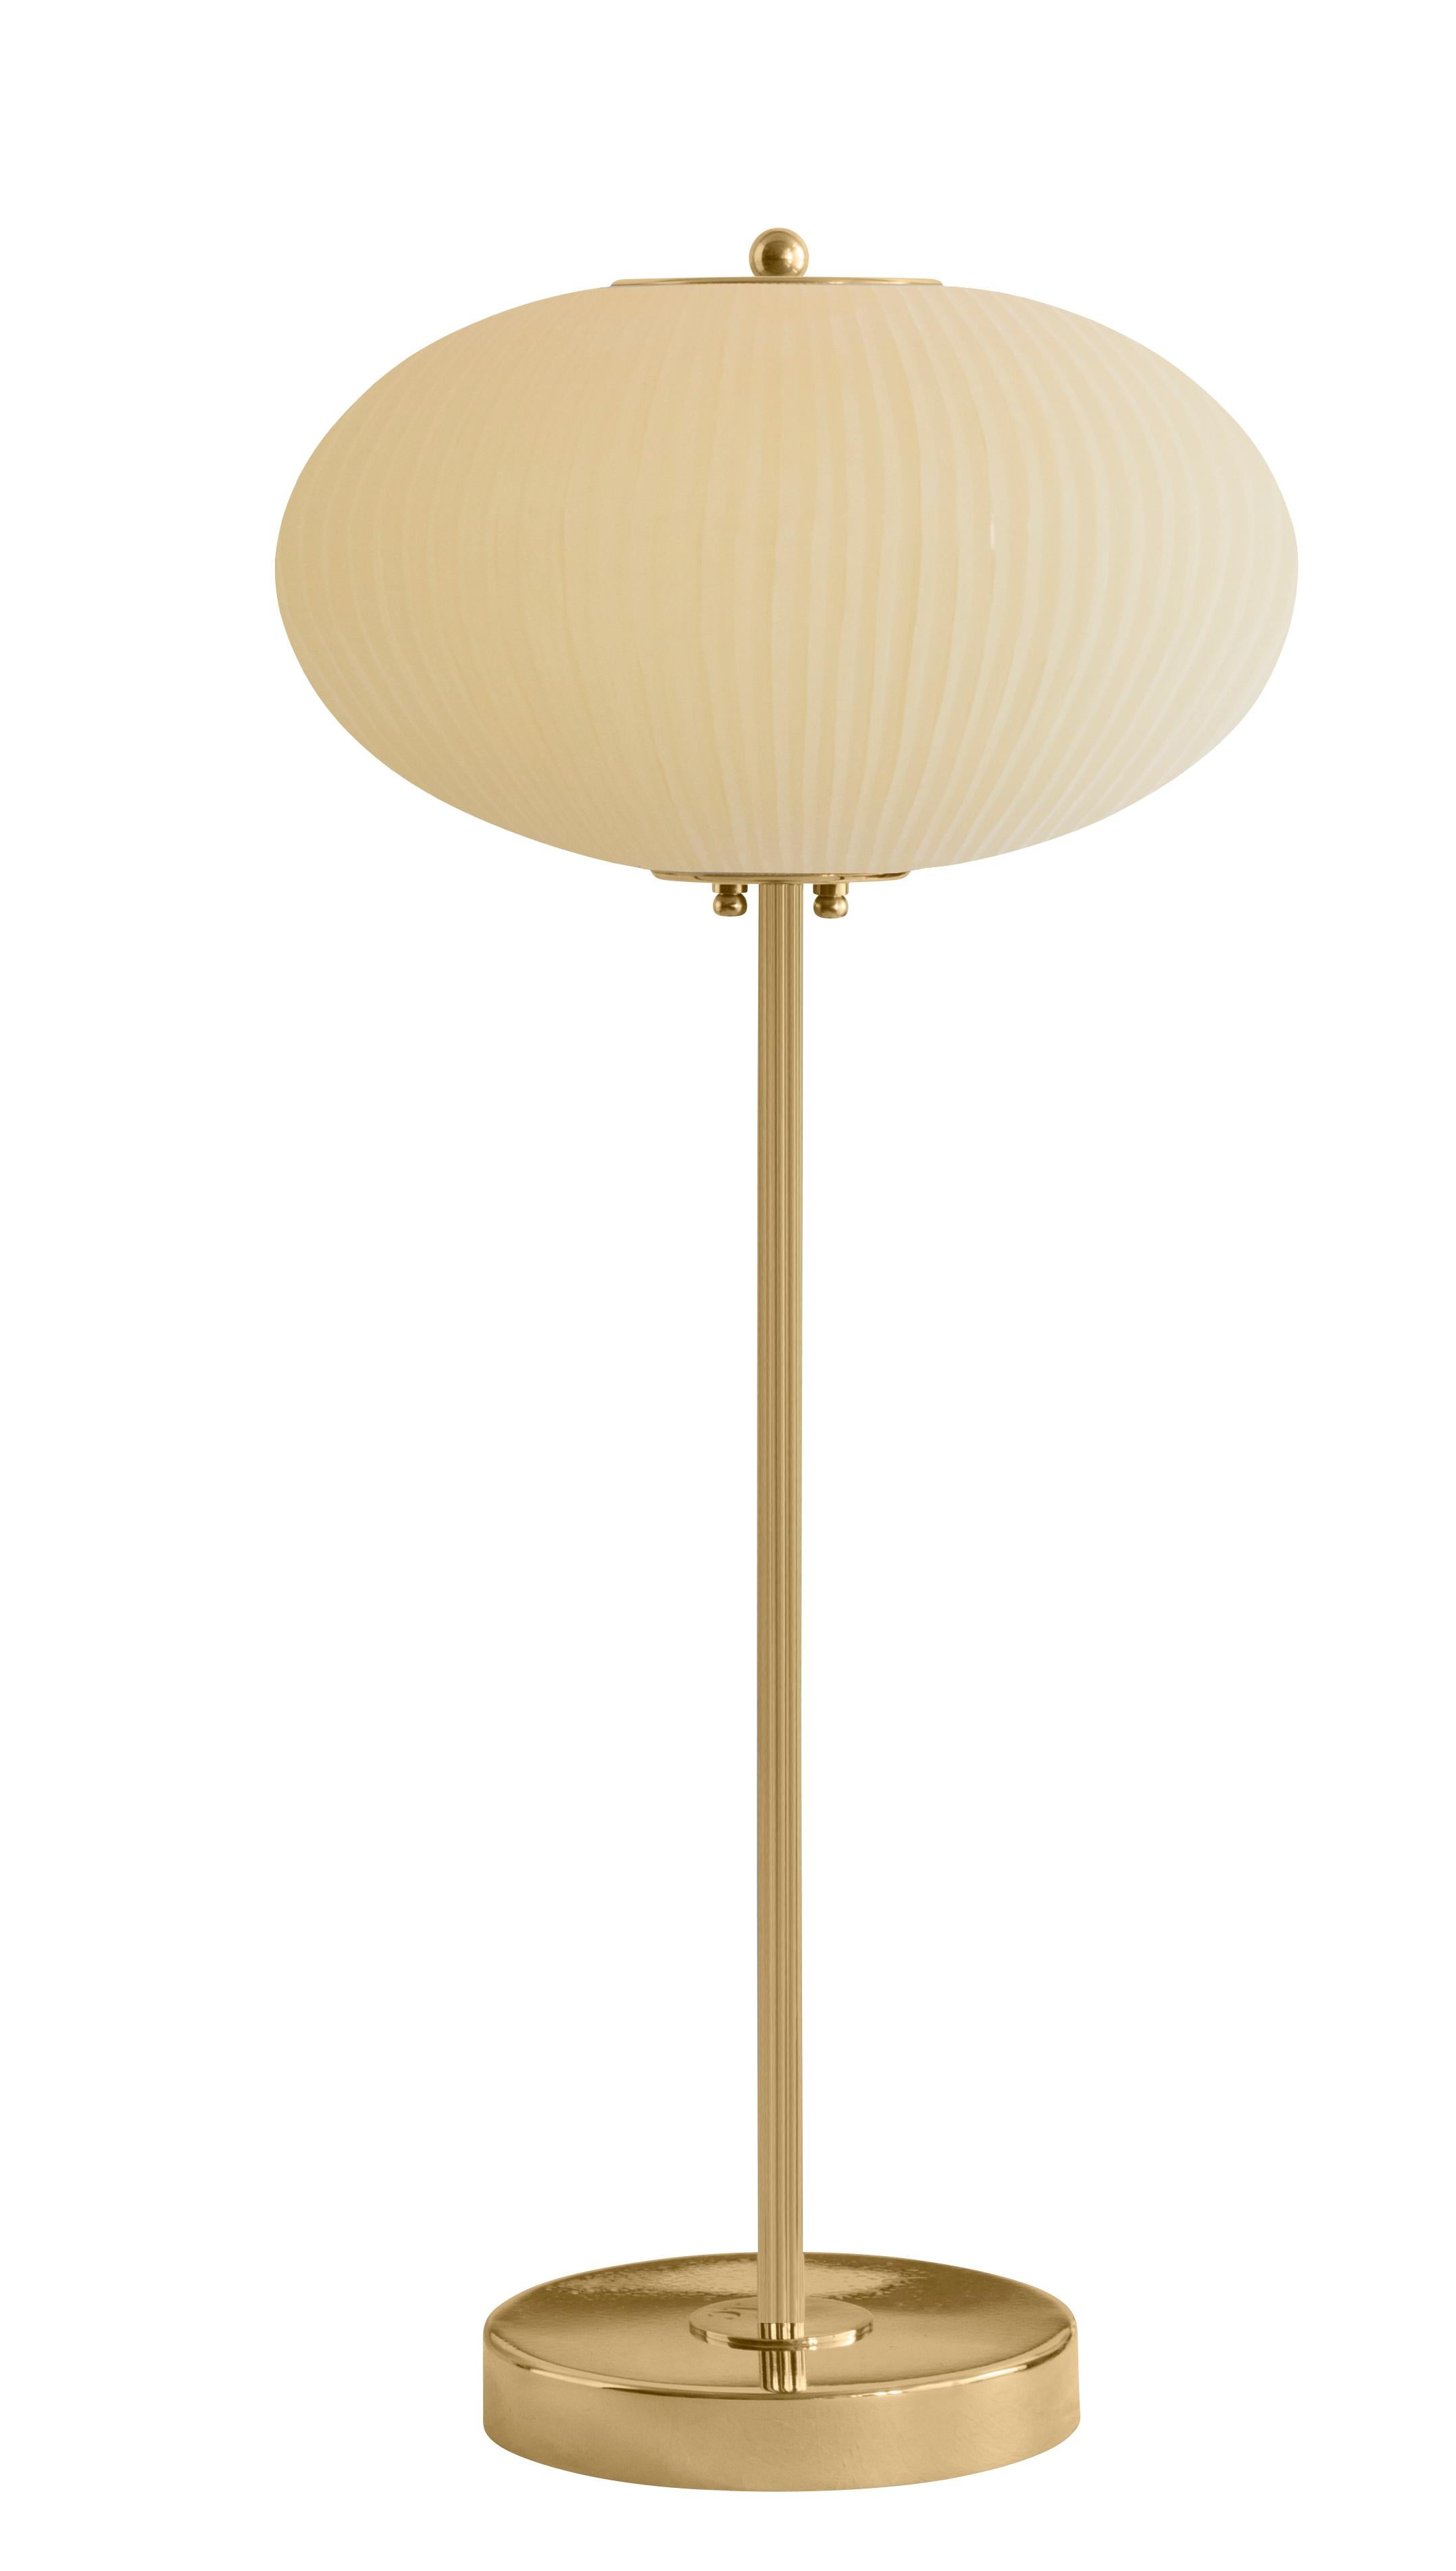 Table lamp China 07 by Magic Circus Editions
Dimensions: H 70 x W 32 x D 32 cm
Materials: Brass, mouth blown glass sculpted with a diamond saw
Colour: mustard yellow

Available finishes: Brass, nickel
Available colours: enamel soft white, soft